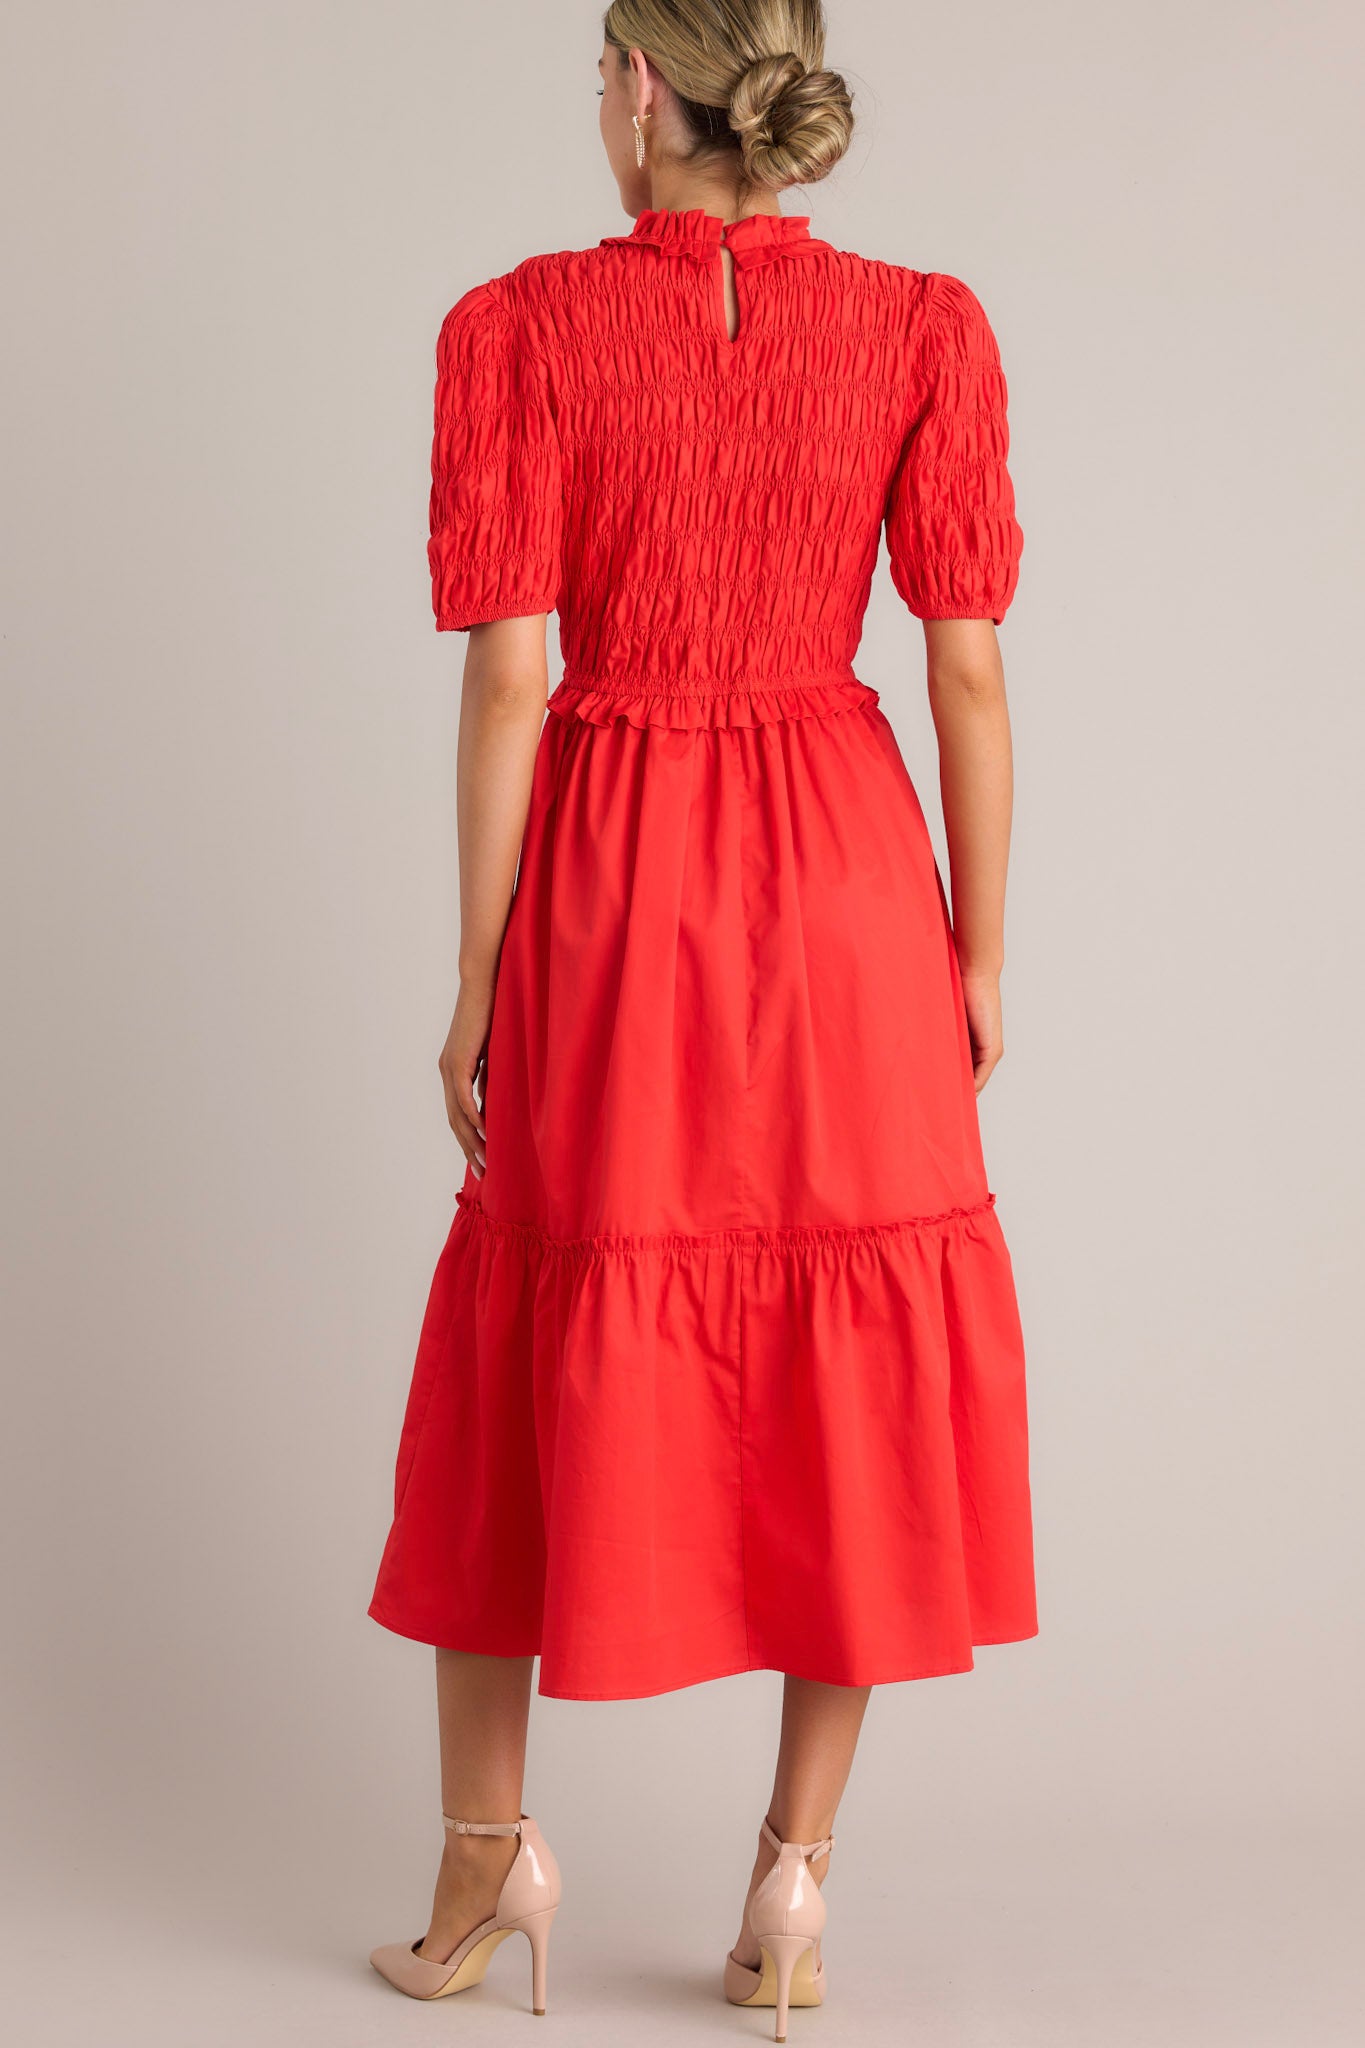 Back view of this red midi dress that features high ruffled neckline, a keyhole with button closure, a fully smocked bodice, a tiered design, a fully smocked elastic cuffed half sleeves.